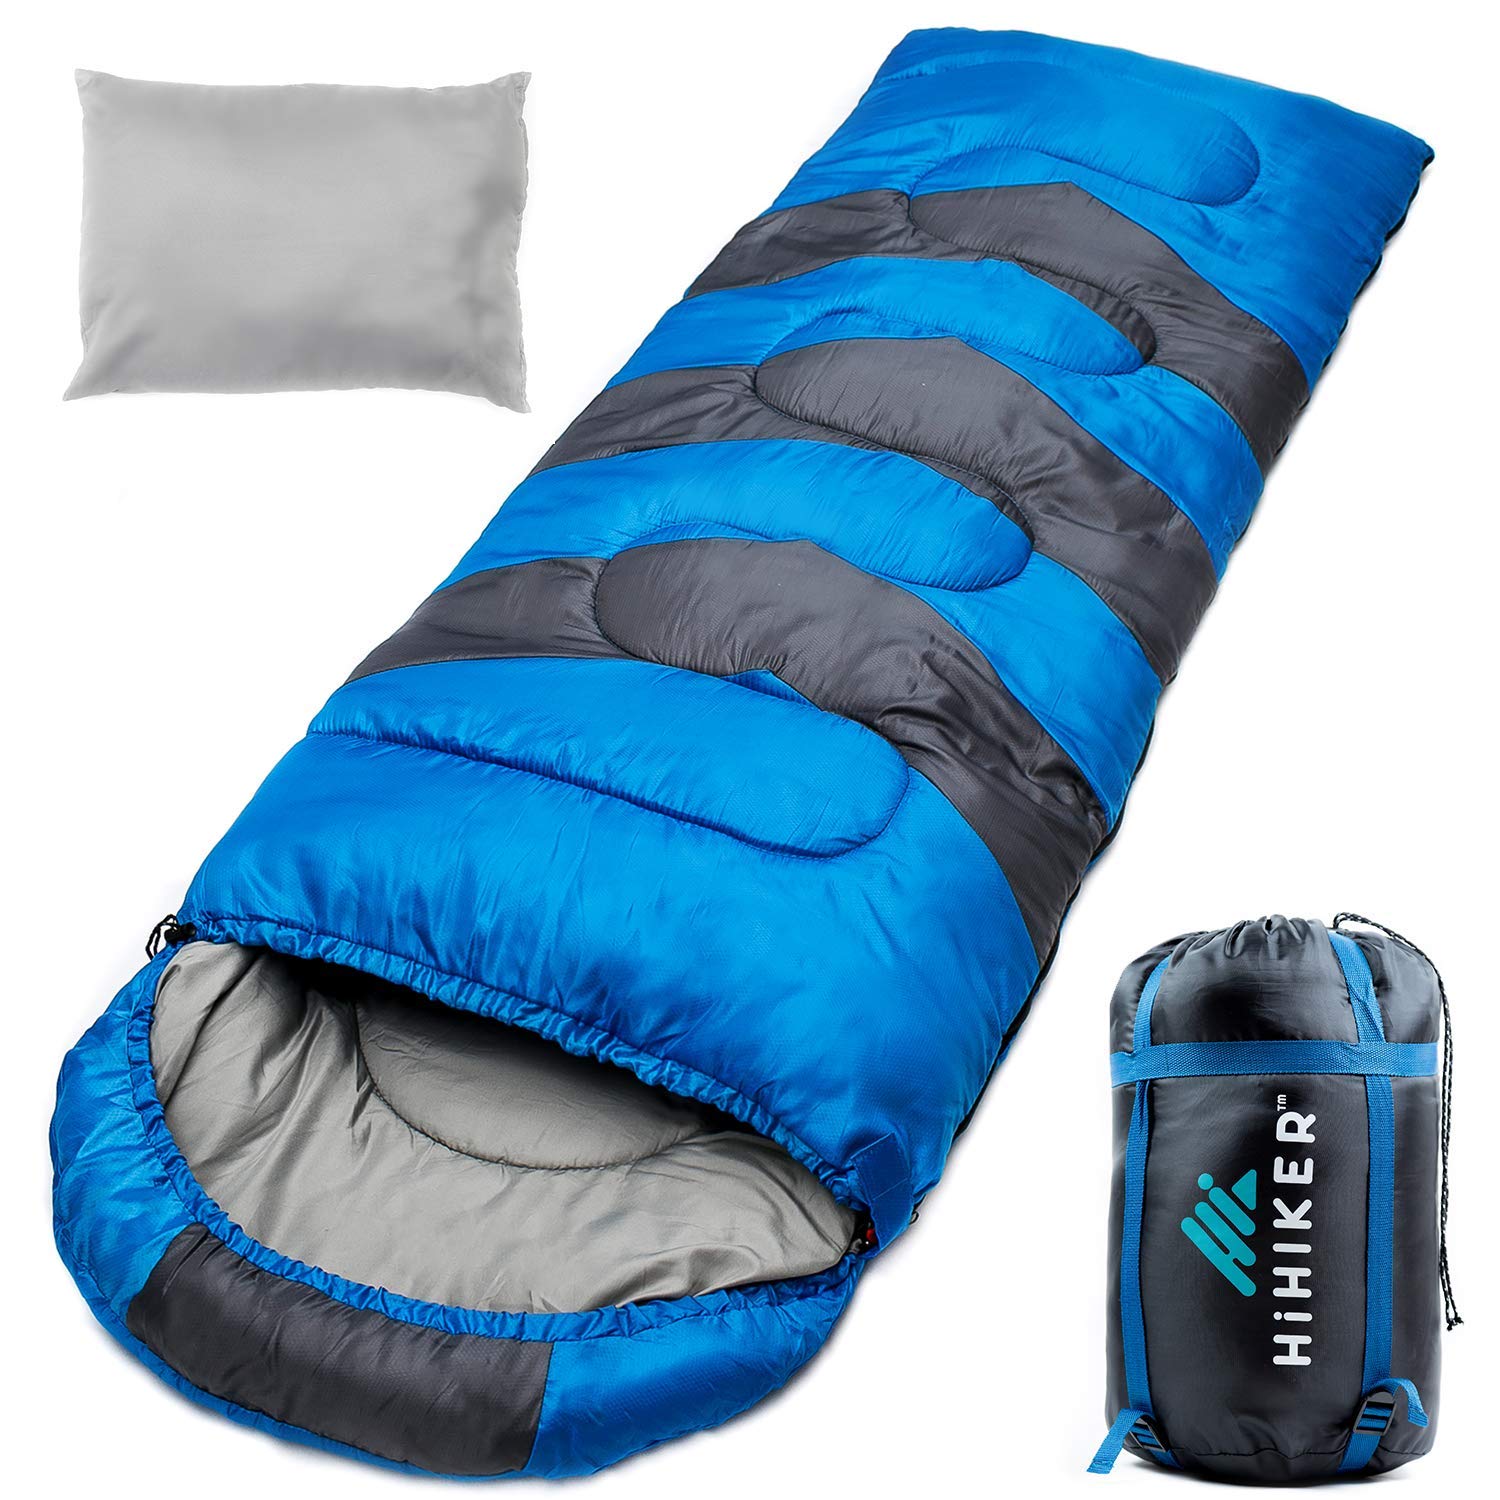 HiHiker Camping Sleeping Bag + Travel Pillow w/Compact Compression